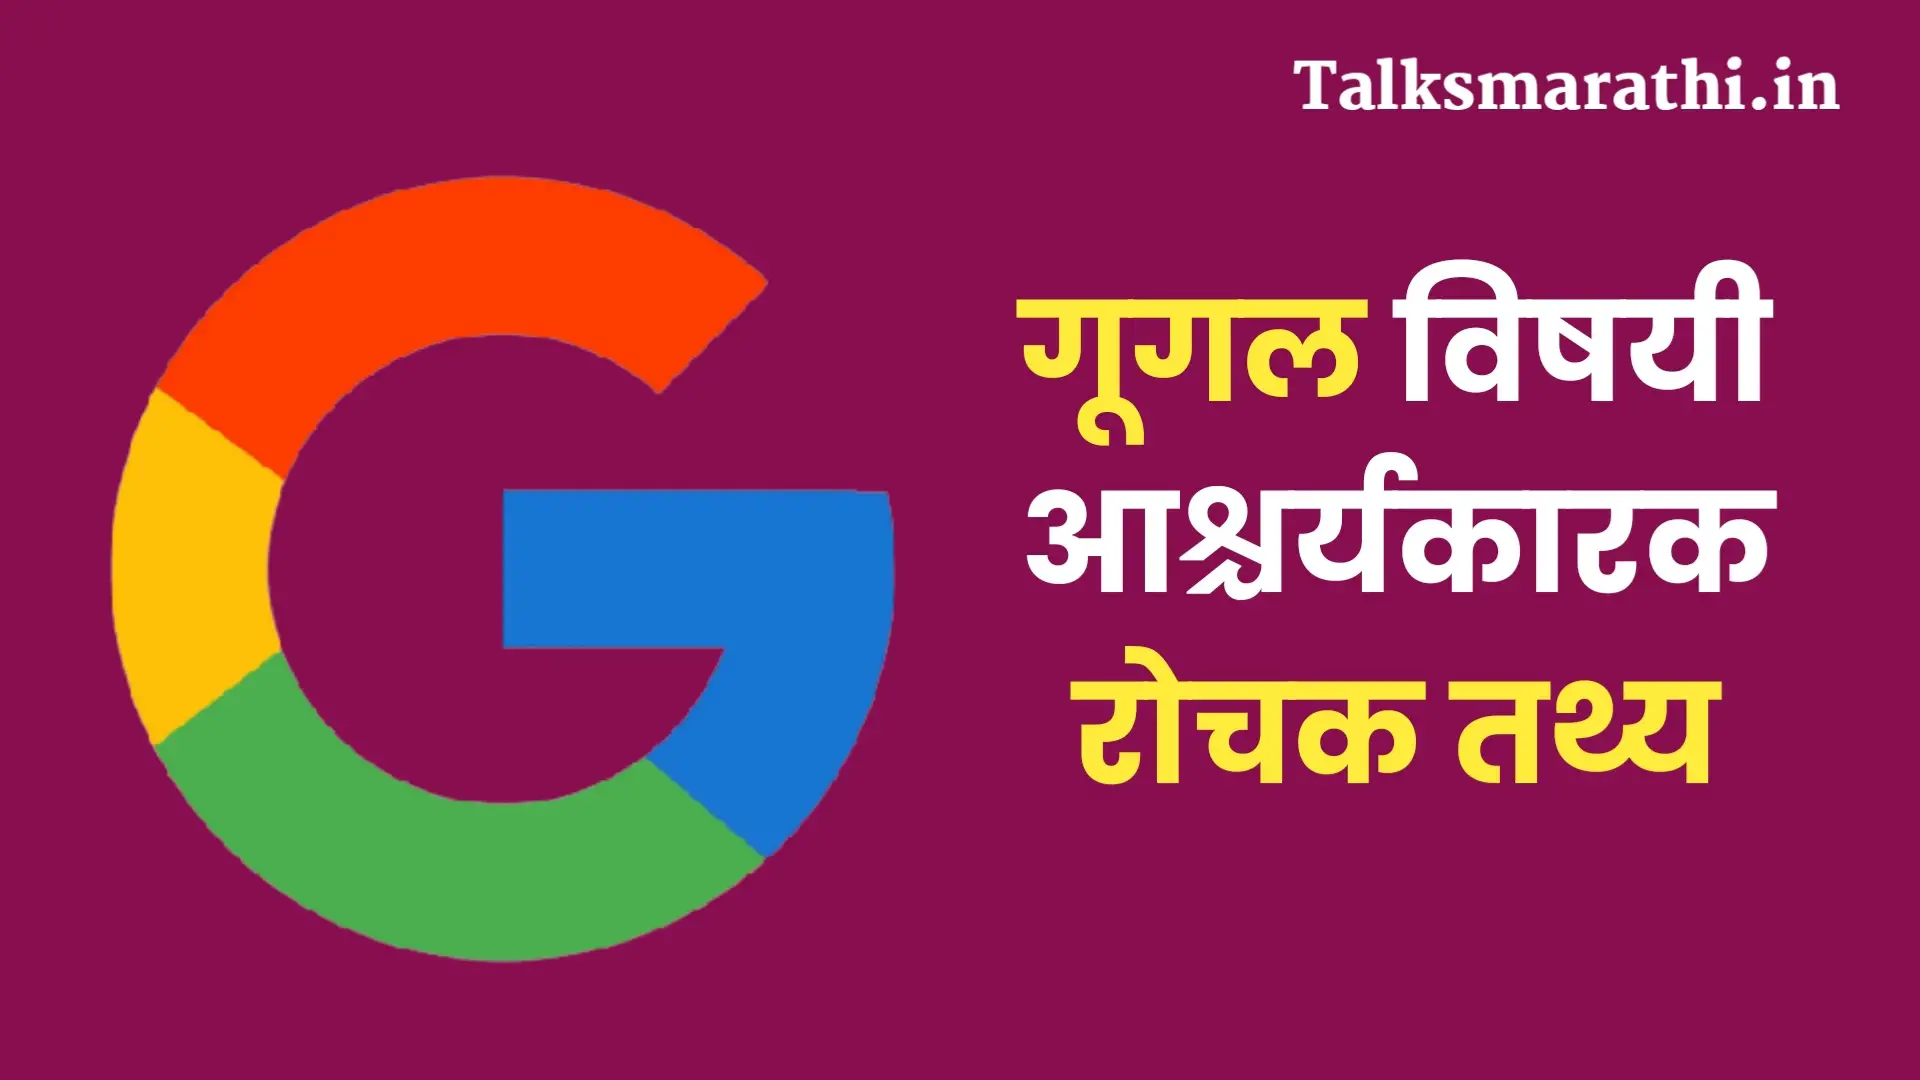 20 Intresting facts about Google in Marathi